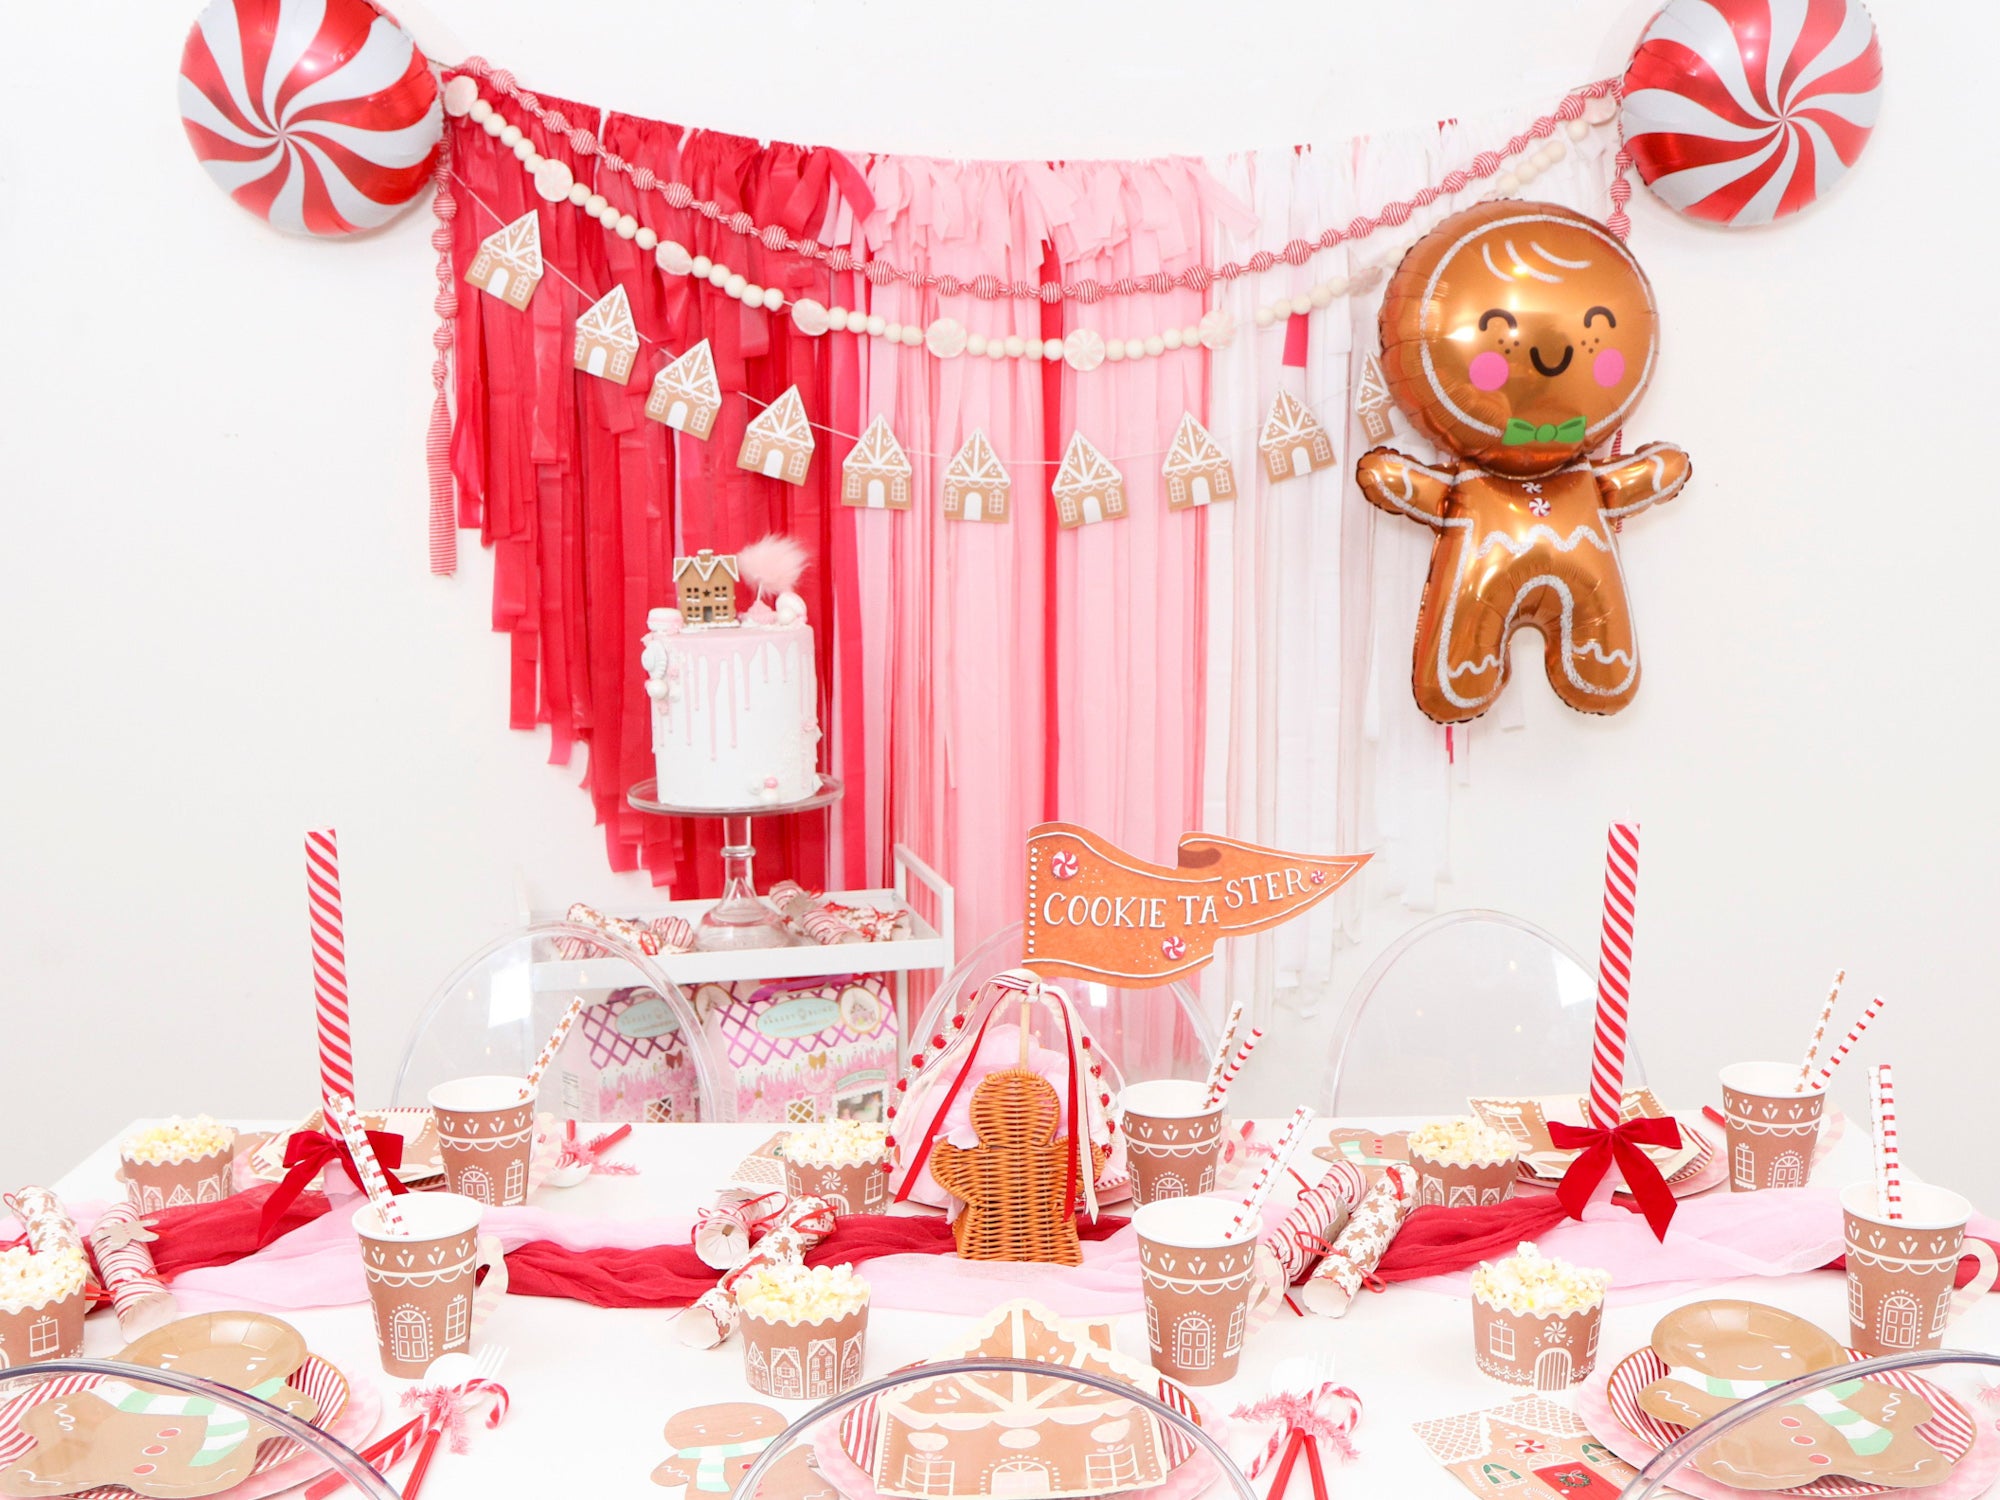 How to Host a Sweet Gingerbread House Decorating Party | The Party Darling